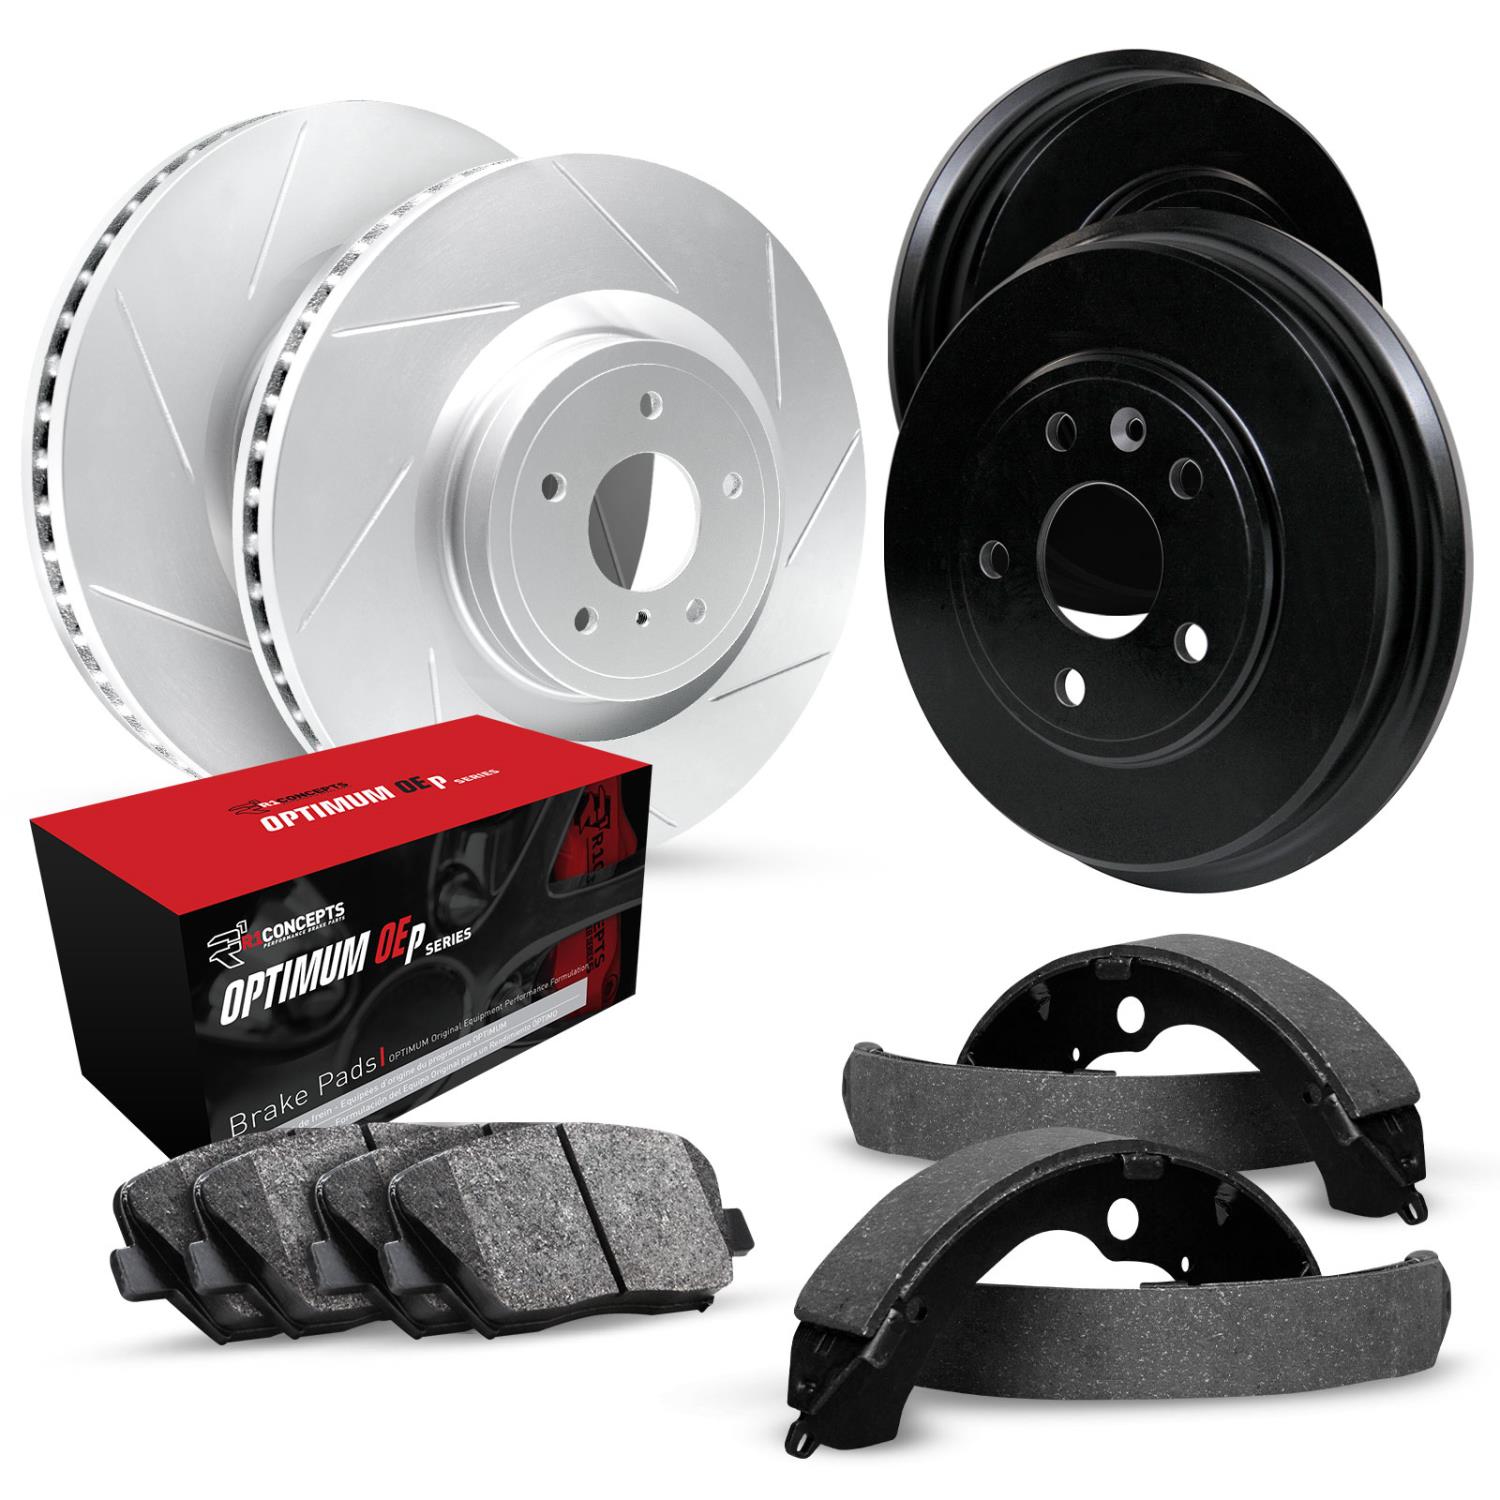 GEO-Carbon Slotted Brake Rotor & Drum Set w/Optimum OE Pads & Shoes, 2005-2006 Lexus/Toyota/Scion, Position: Front & Rear